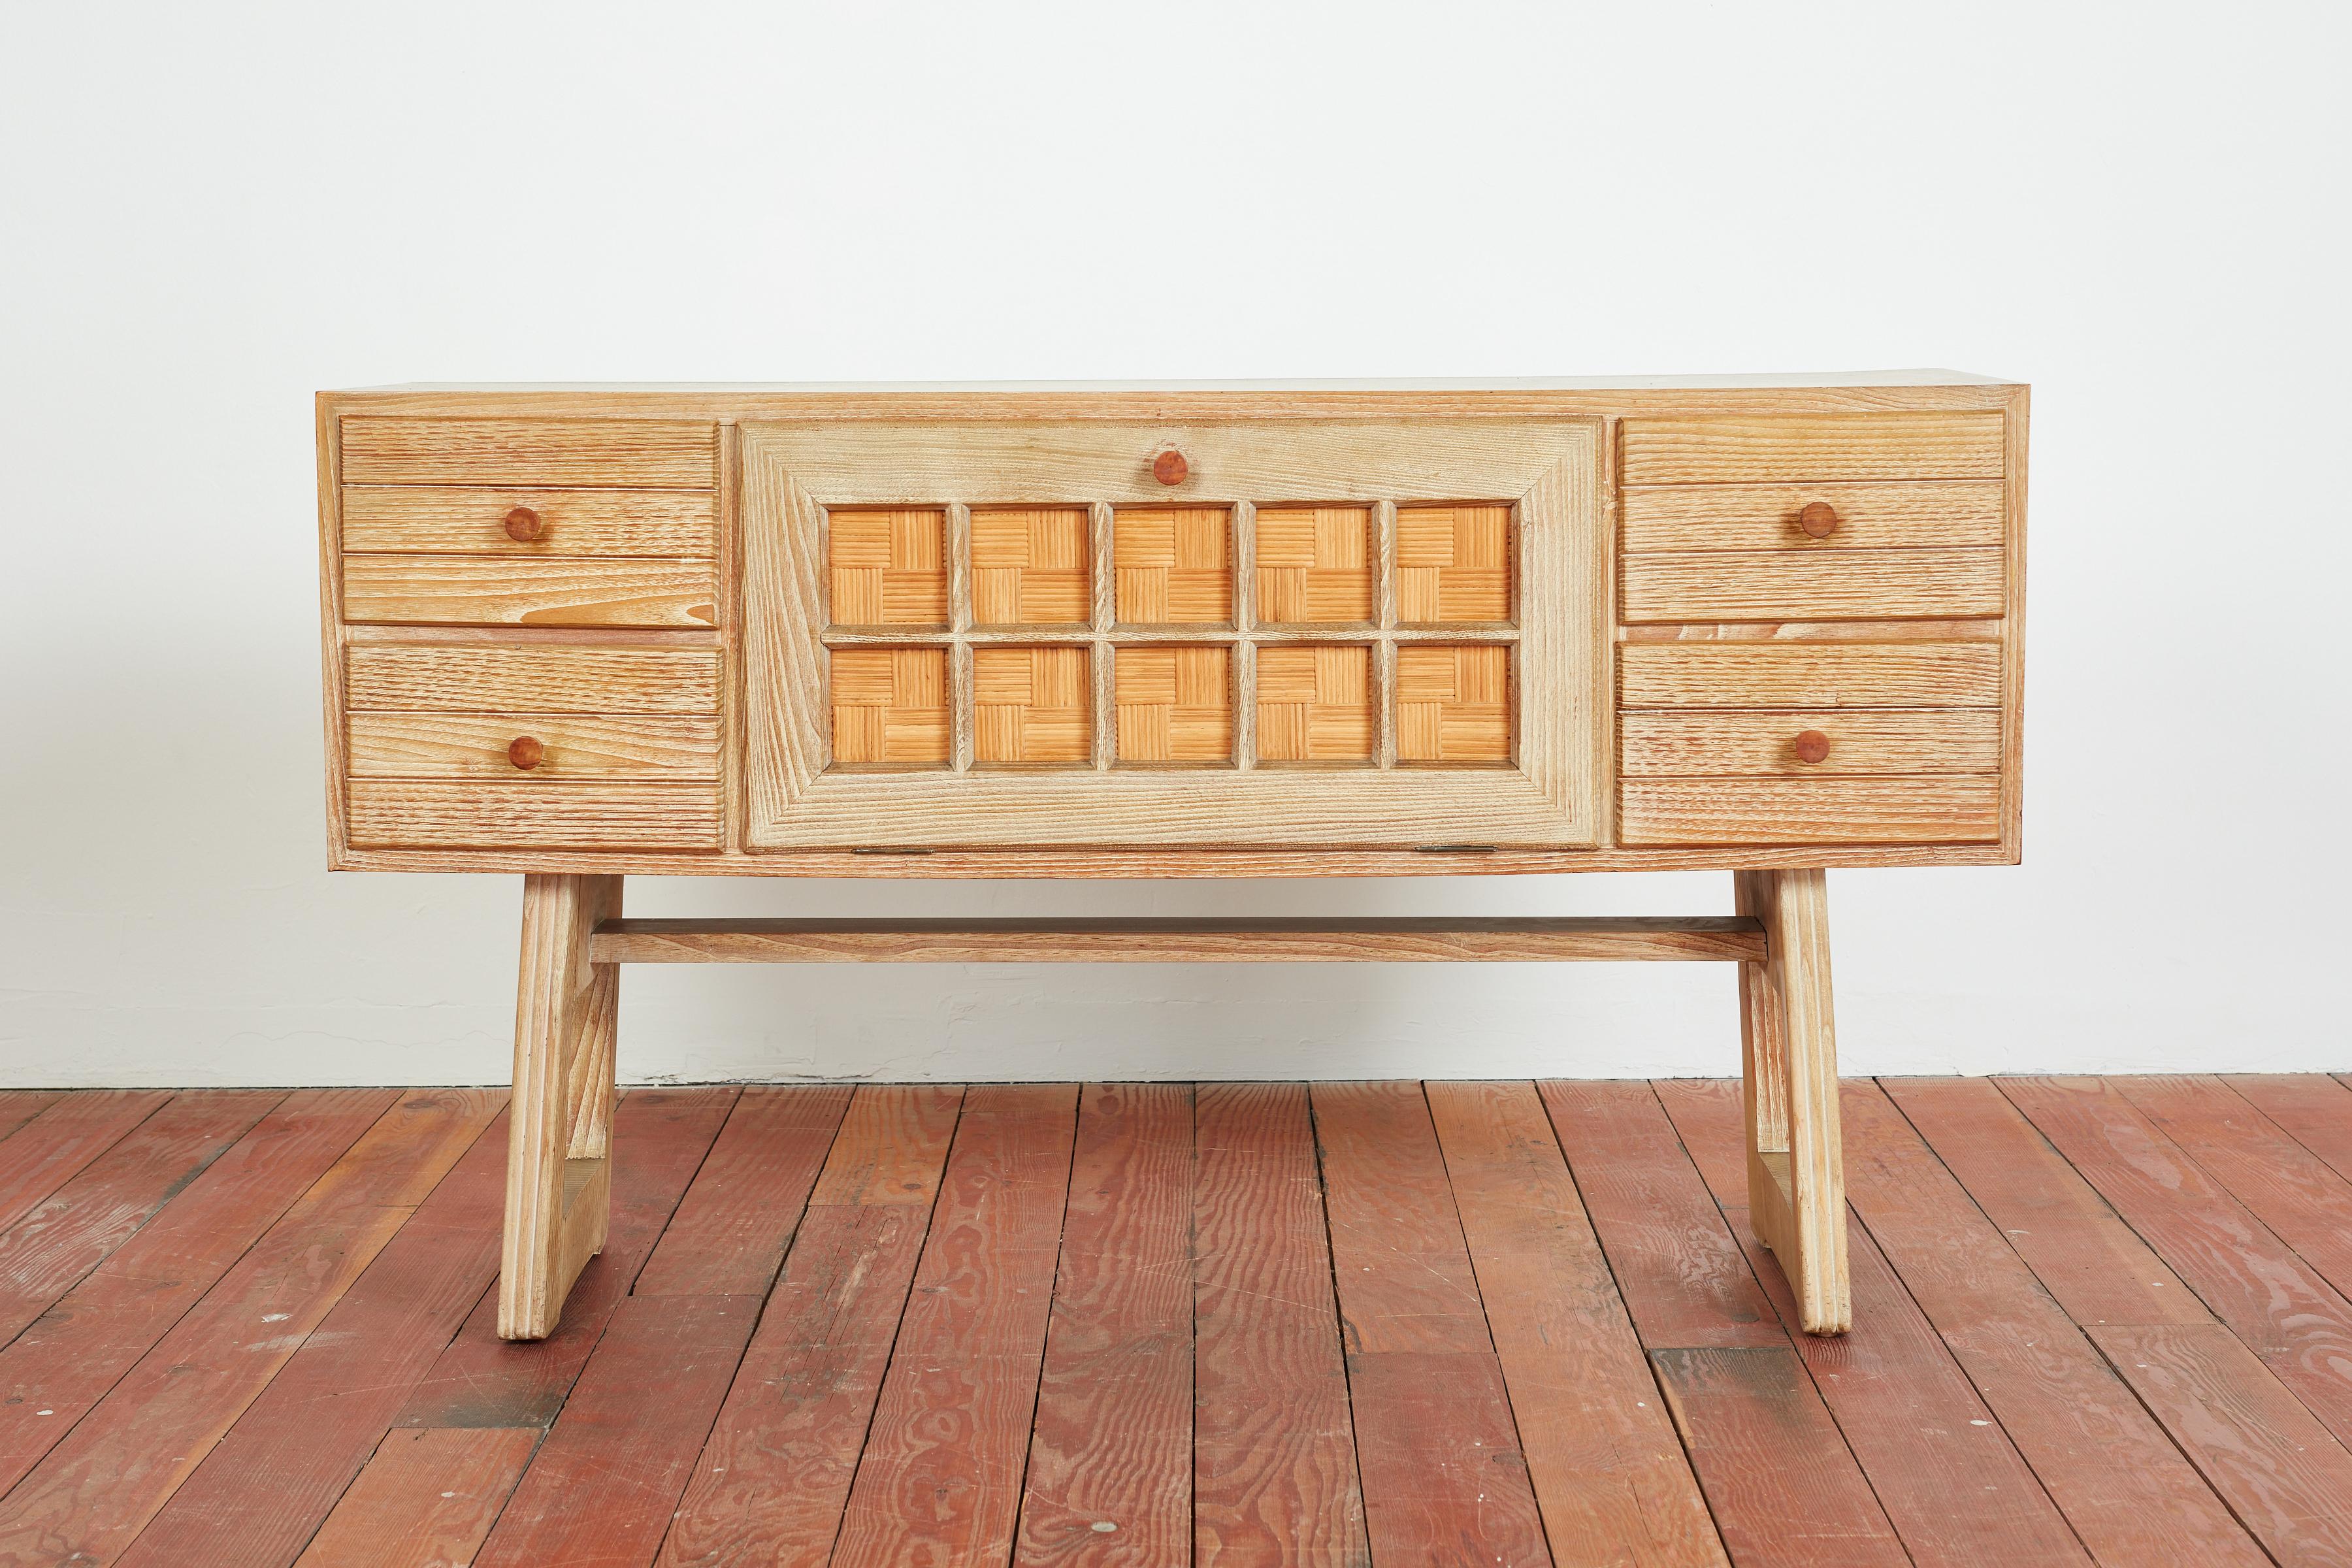 Unique Italian sideboard in sandblasted oak with woven rattan drop front and drawers on both sides. 
Wonderful grain in oak
Italy, 1950s